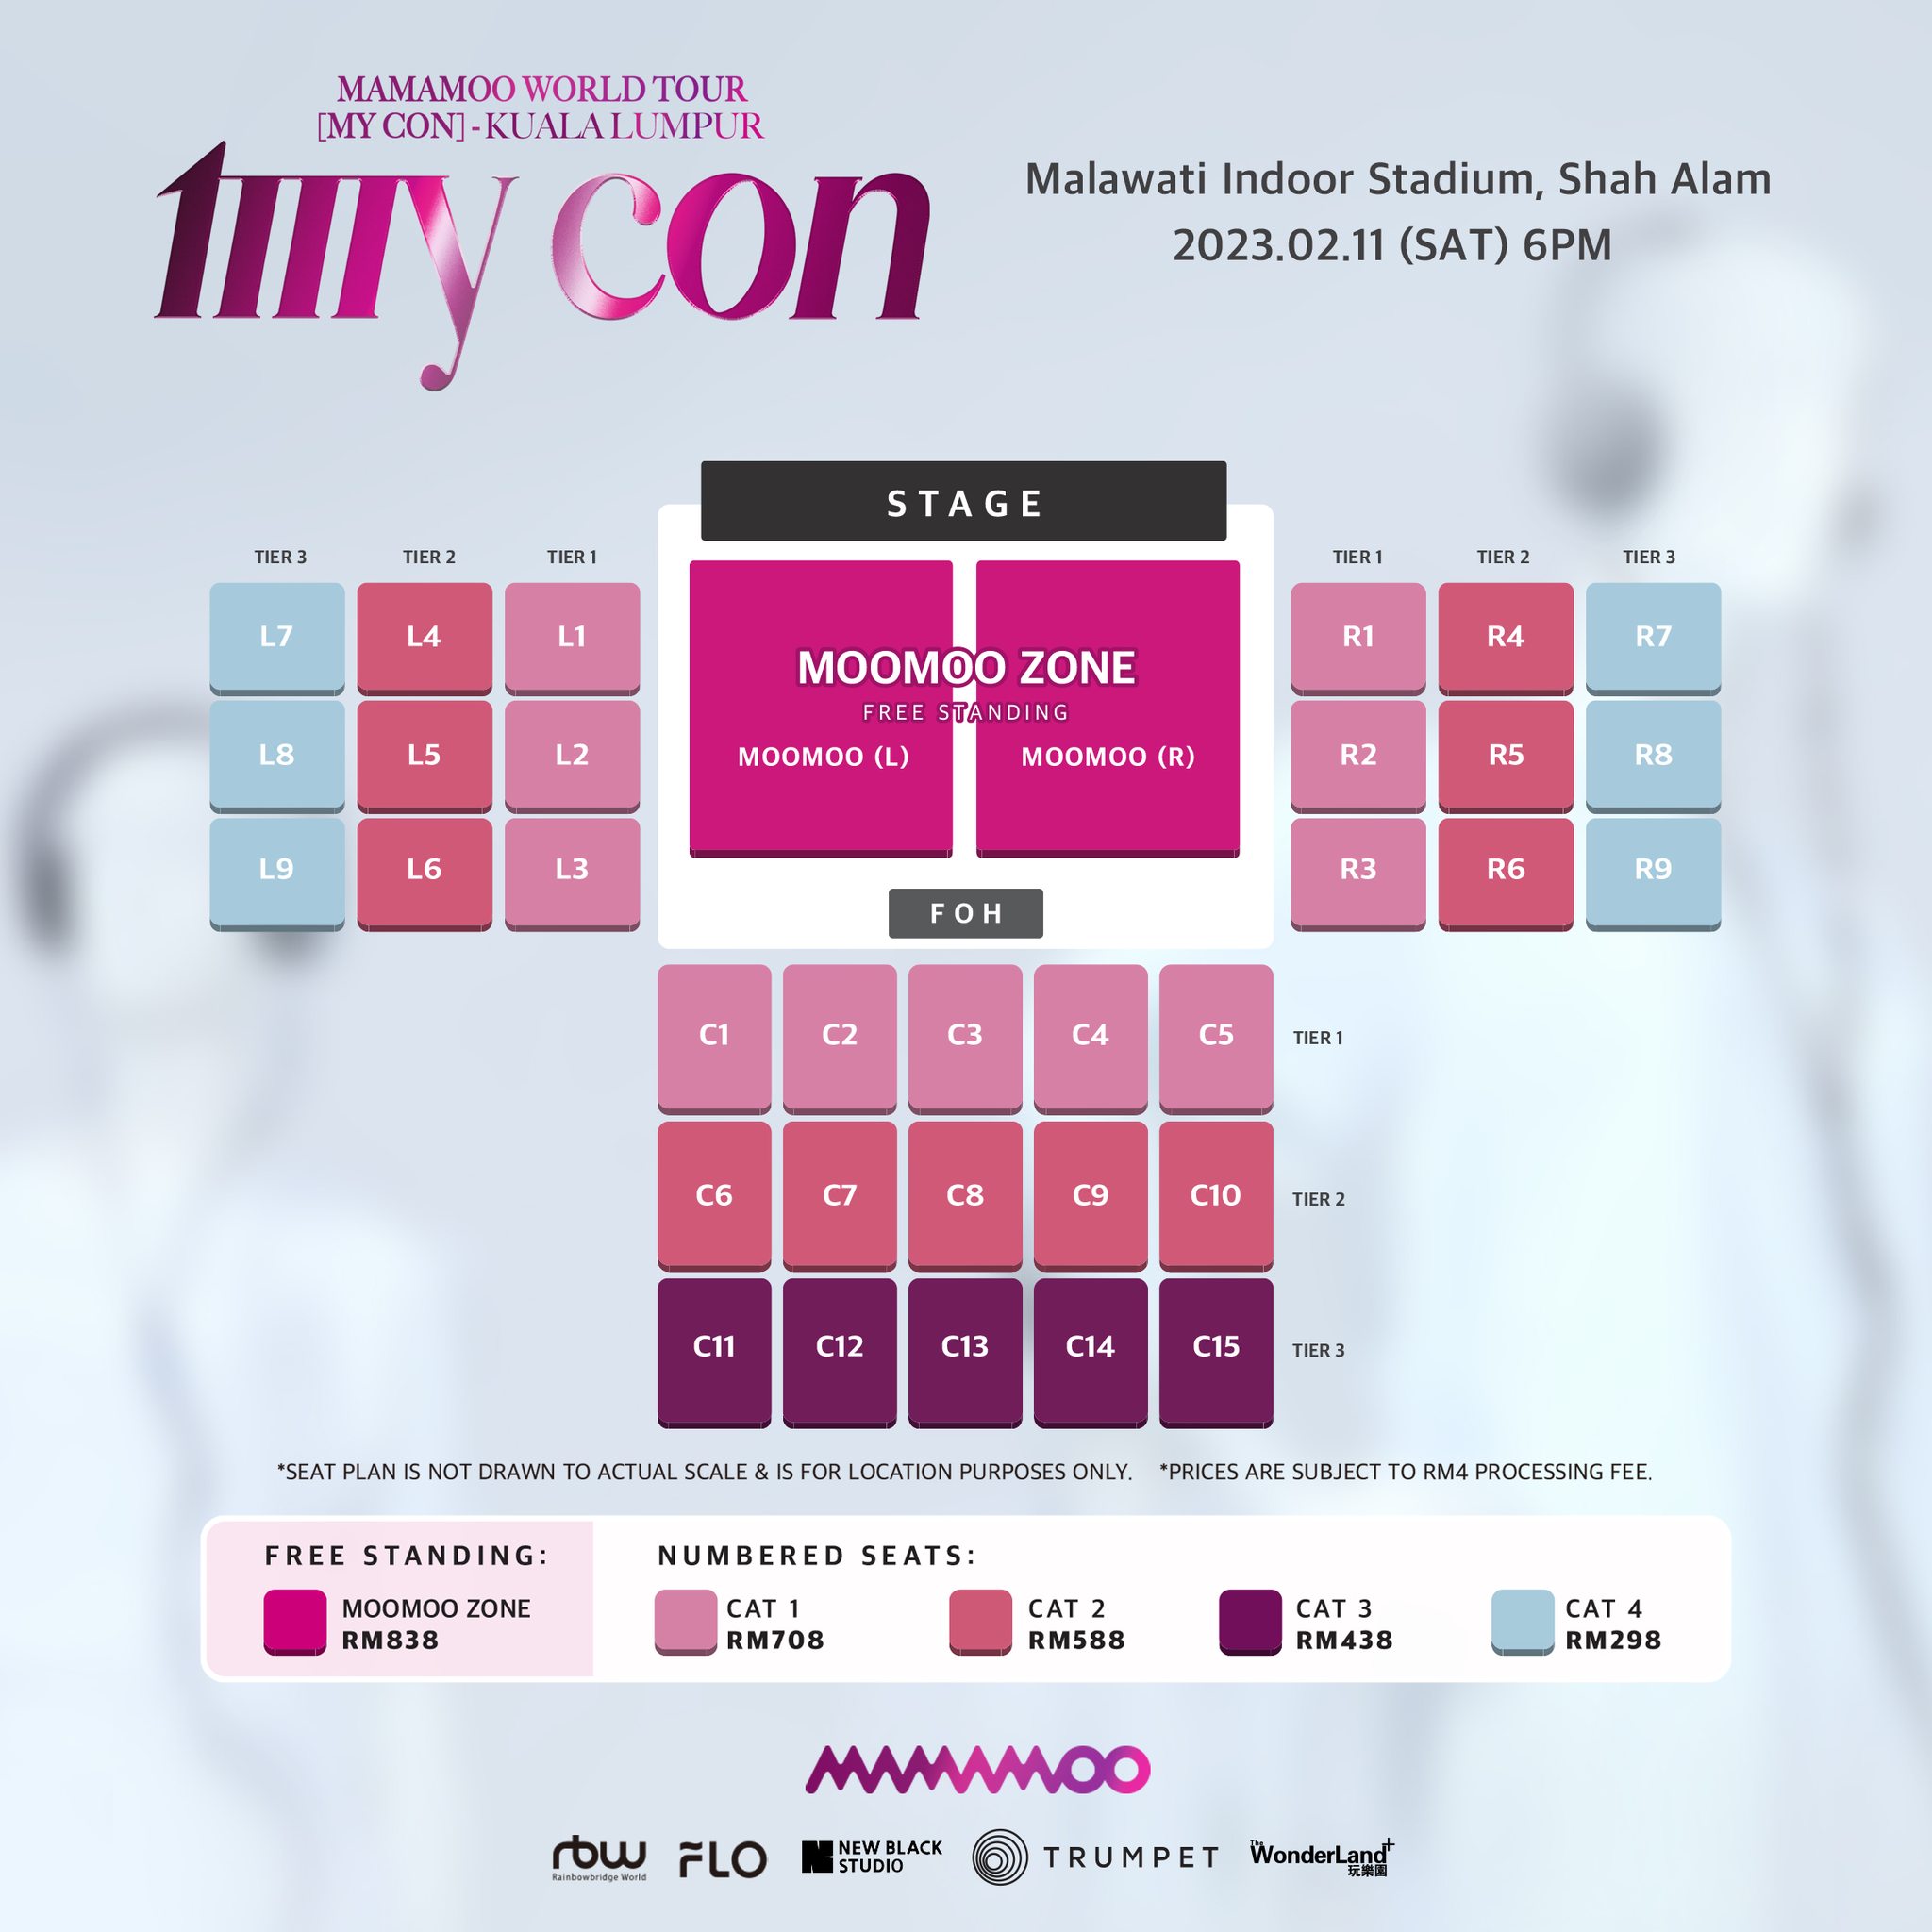 MAMAMOO 'My Con' World Tour Announces Ticket Prices & Seating Plans